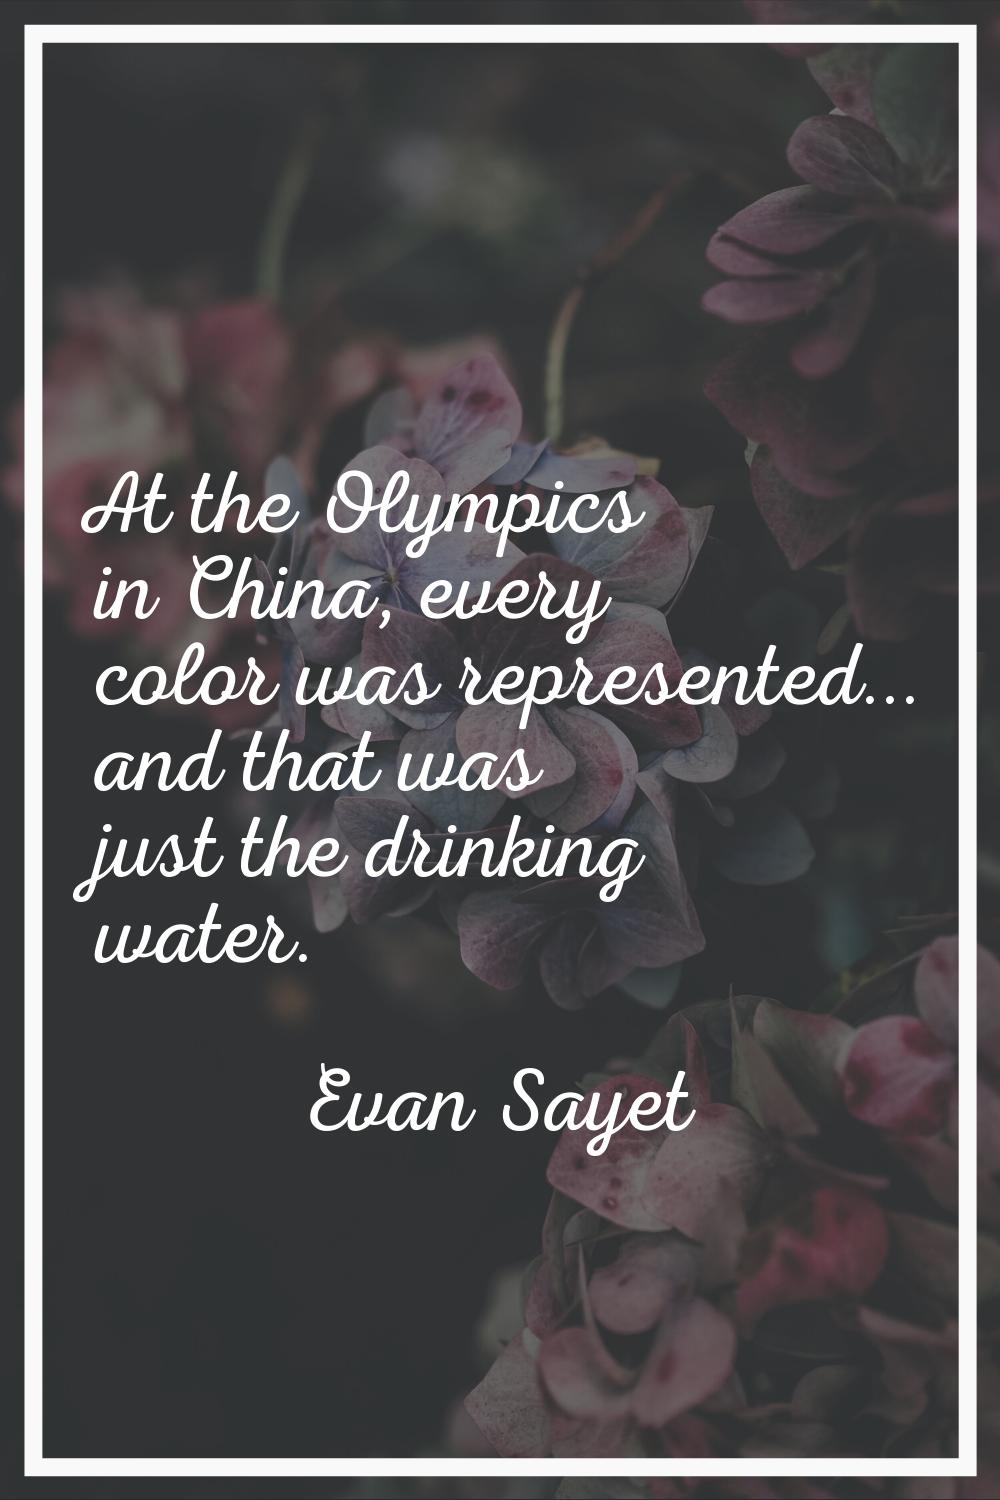 At the Olympics in China, every color was represented... and that was just the drinking water.